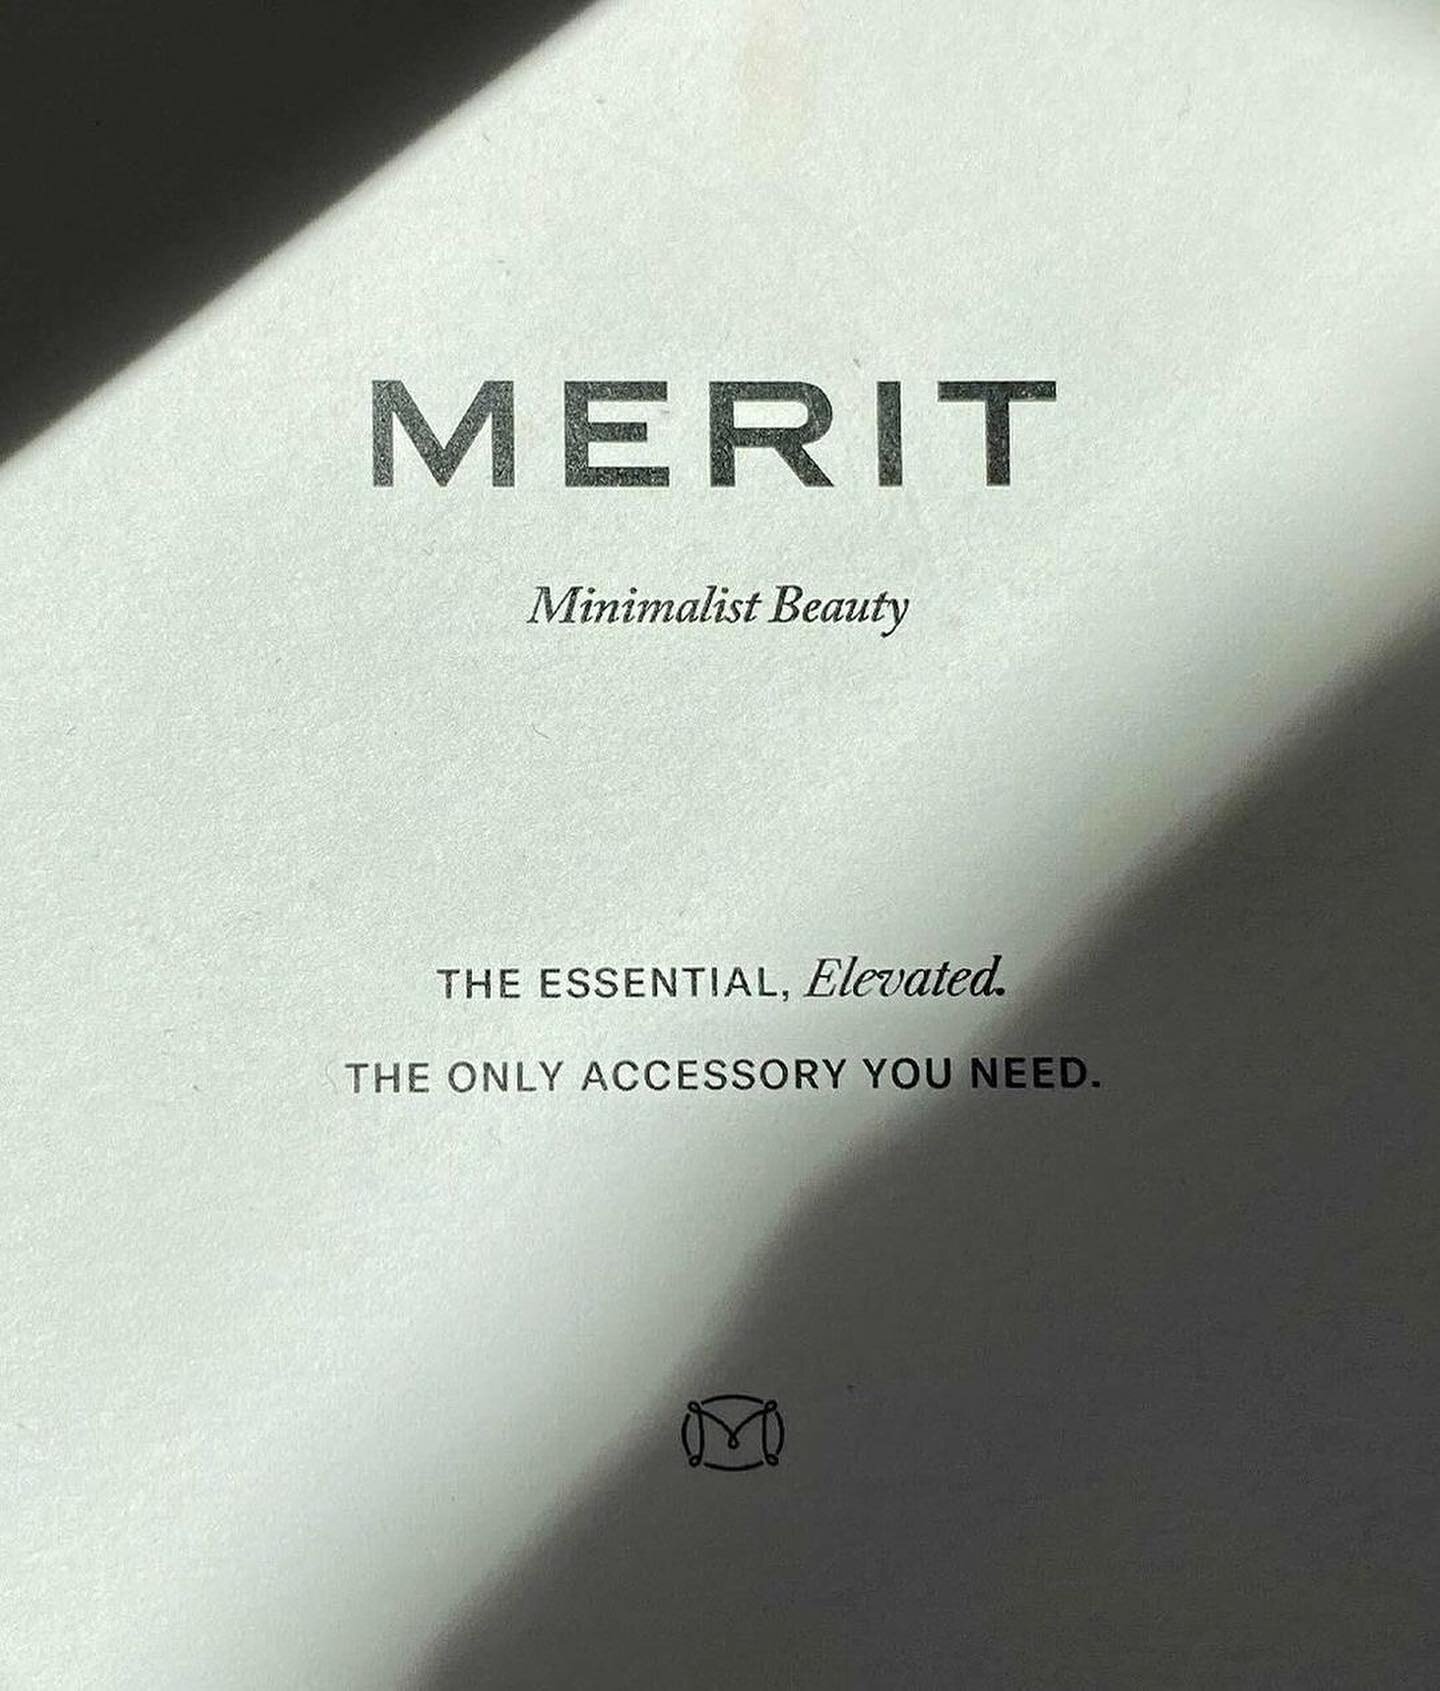 The minimalist, editorial-inspired packaging of our dreams. ✨ As a full-service brand identity design, digital marketing, and public relations agency, sometimes we have to let the strategic (but beautiful) visuals do the talking. In the case of #Meri